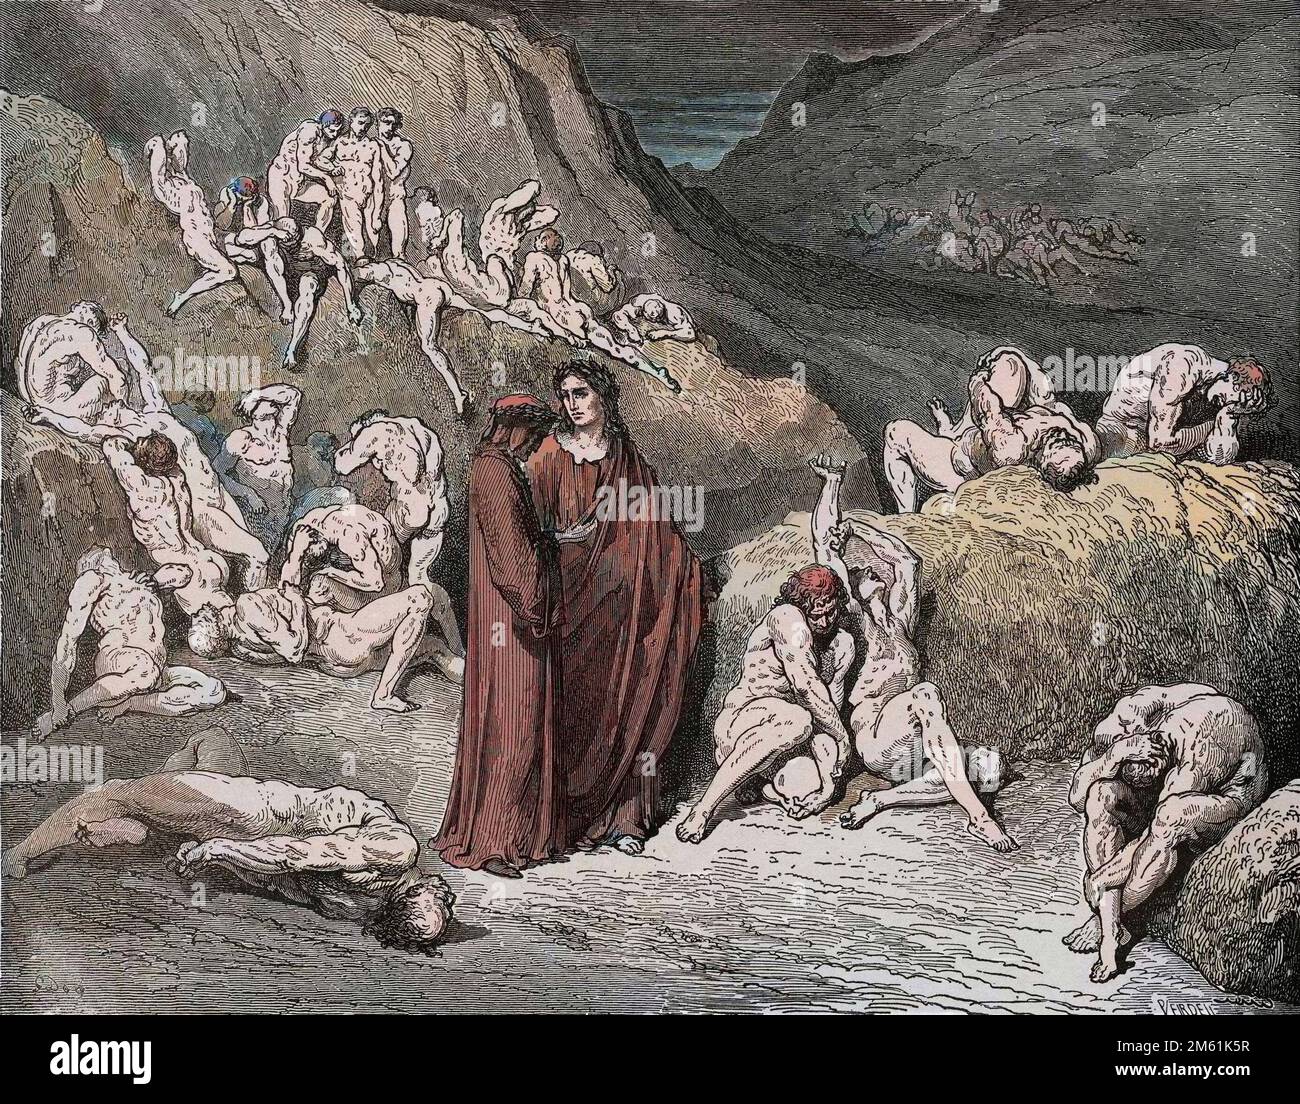 The Divine Comedy by Dante Alighieri , Inferno, Canto 29 : The falsifiers and forgers tormented with itching - by Dante Alighieri (1265-1321) - Illustration de Gustave Dore (1832-1883), 1885 - Colorisation digitale d'apres l'originale Stock Photo